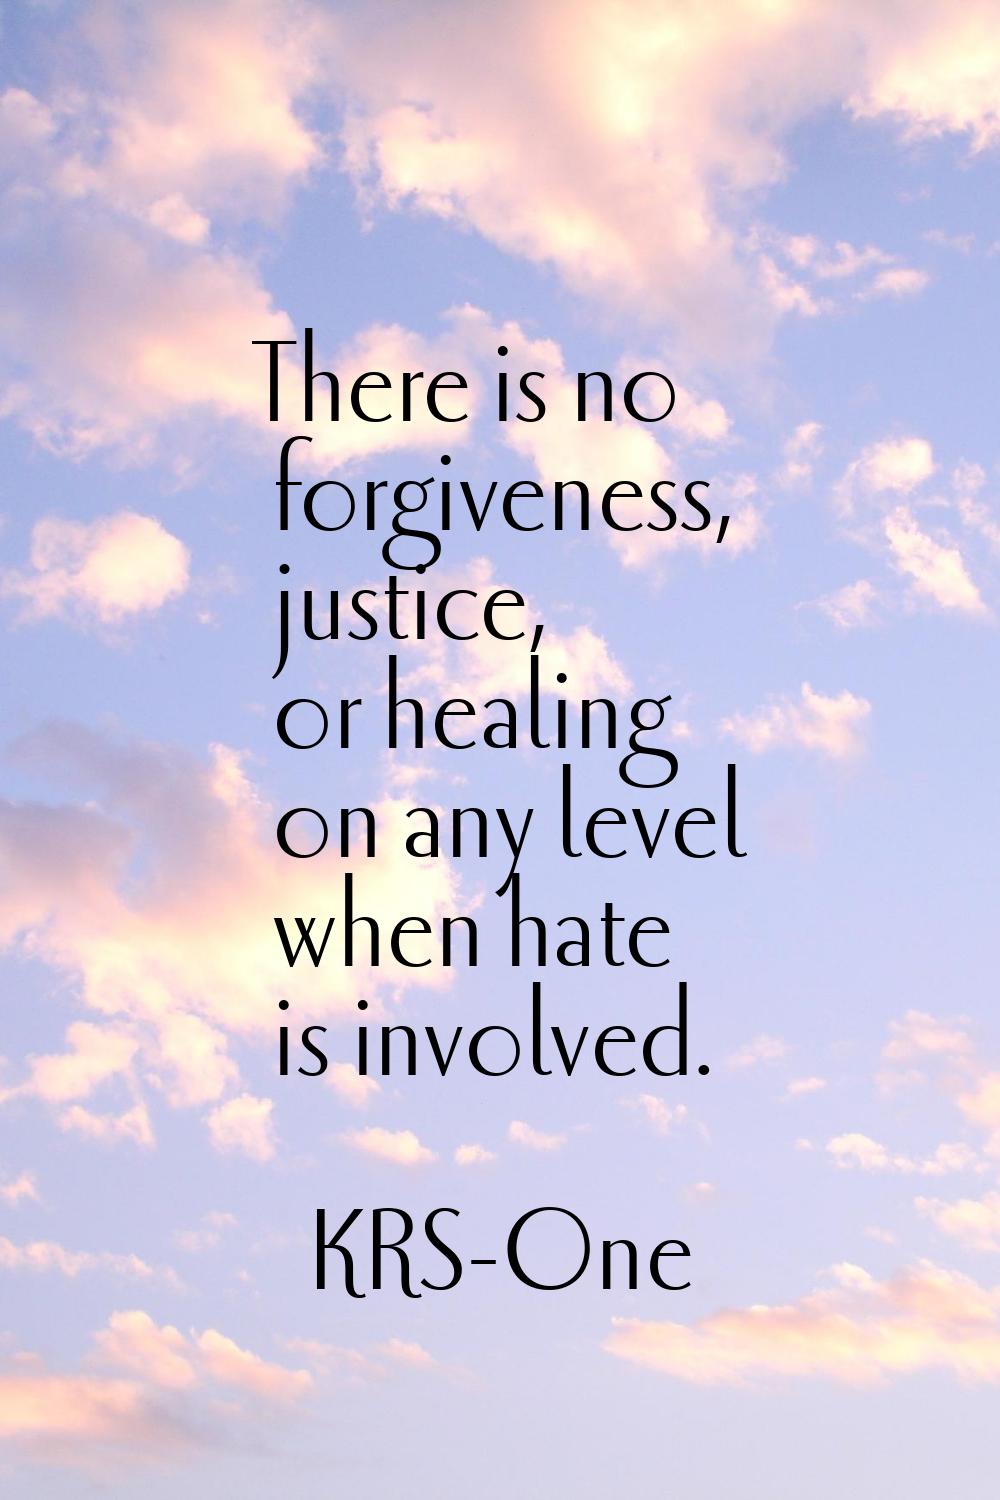 There is no forgiveness, justice, or healing on any level when hate is involved.